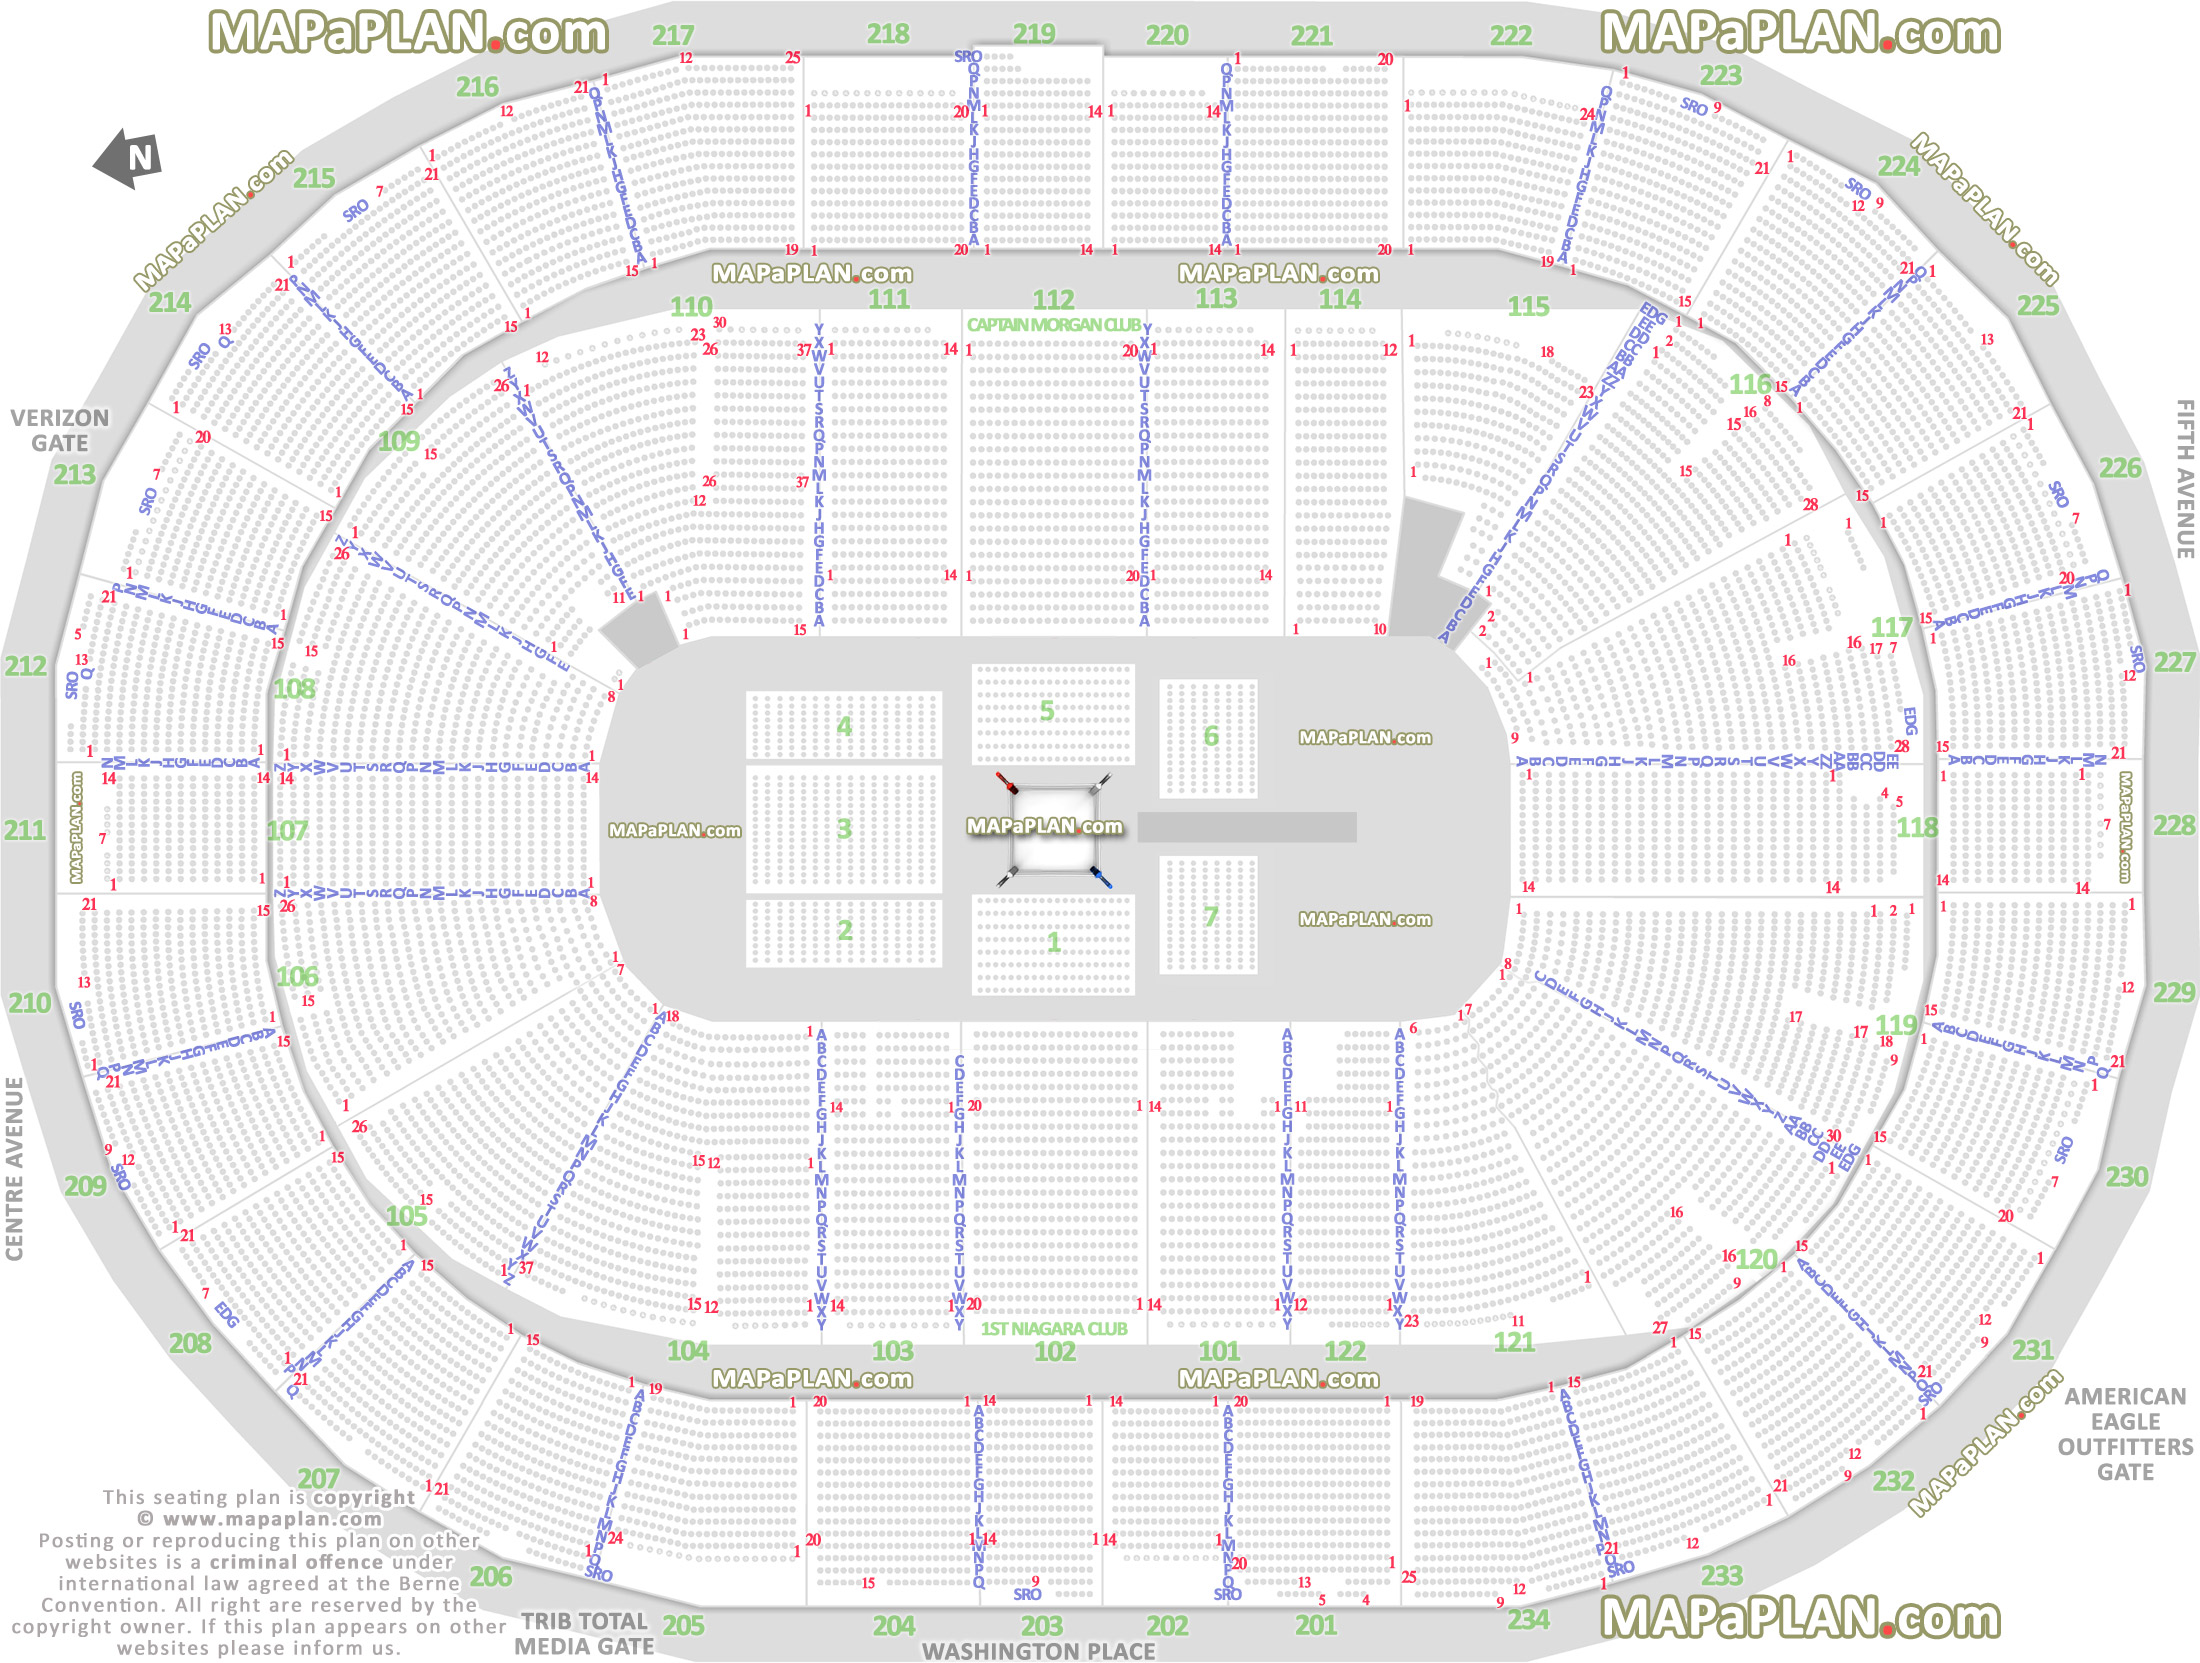 wwe raw smackdown live wrestling boxing match events 360 round ring configuration sro standing room only rows good bad edge side seats luxury private sections Pittsburgh PPG Paints Arena seating chart